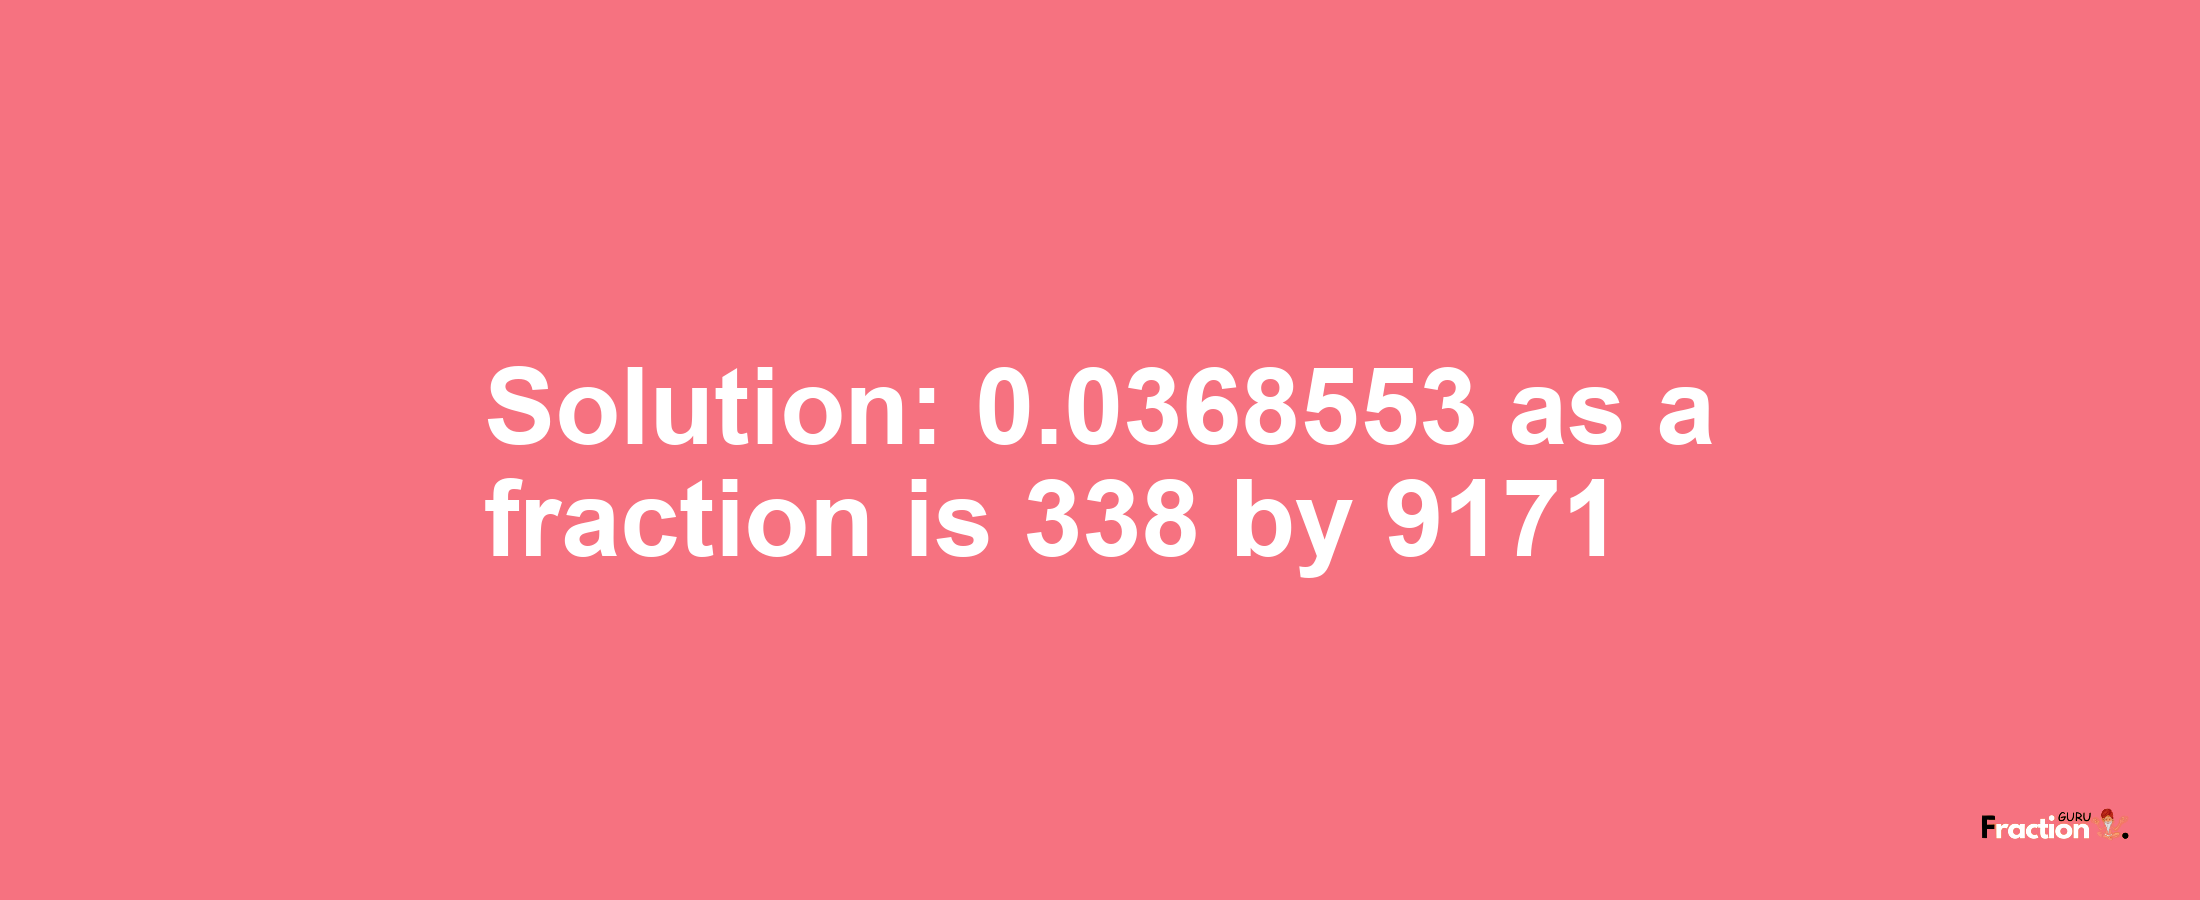 Solution:0.0368553 as a fraction is 338/9171